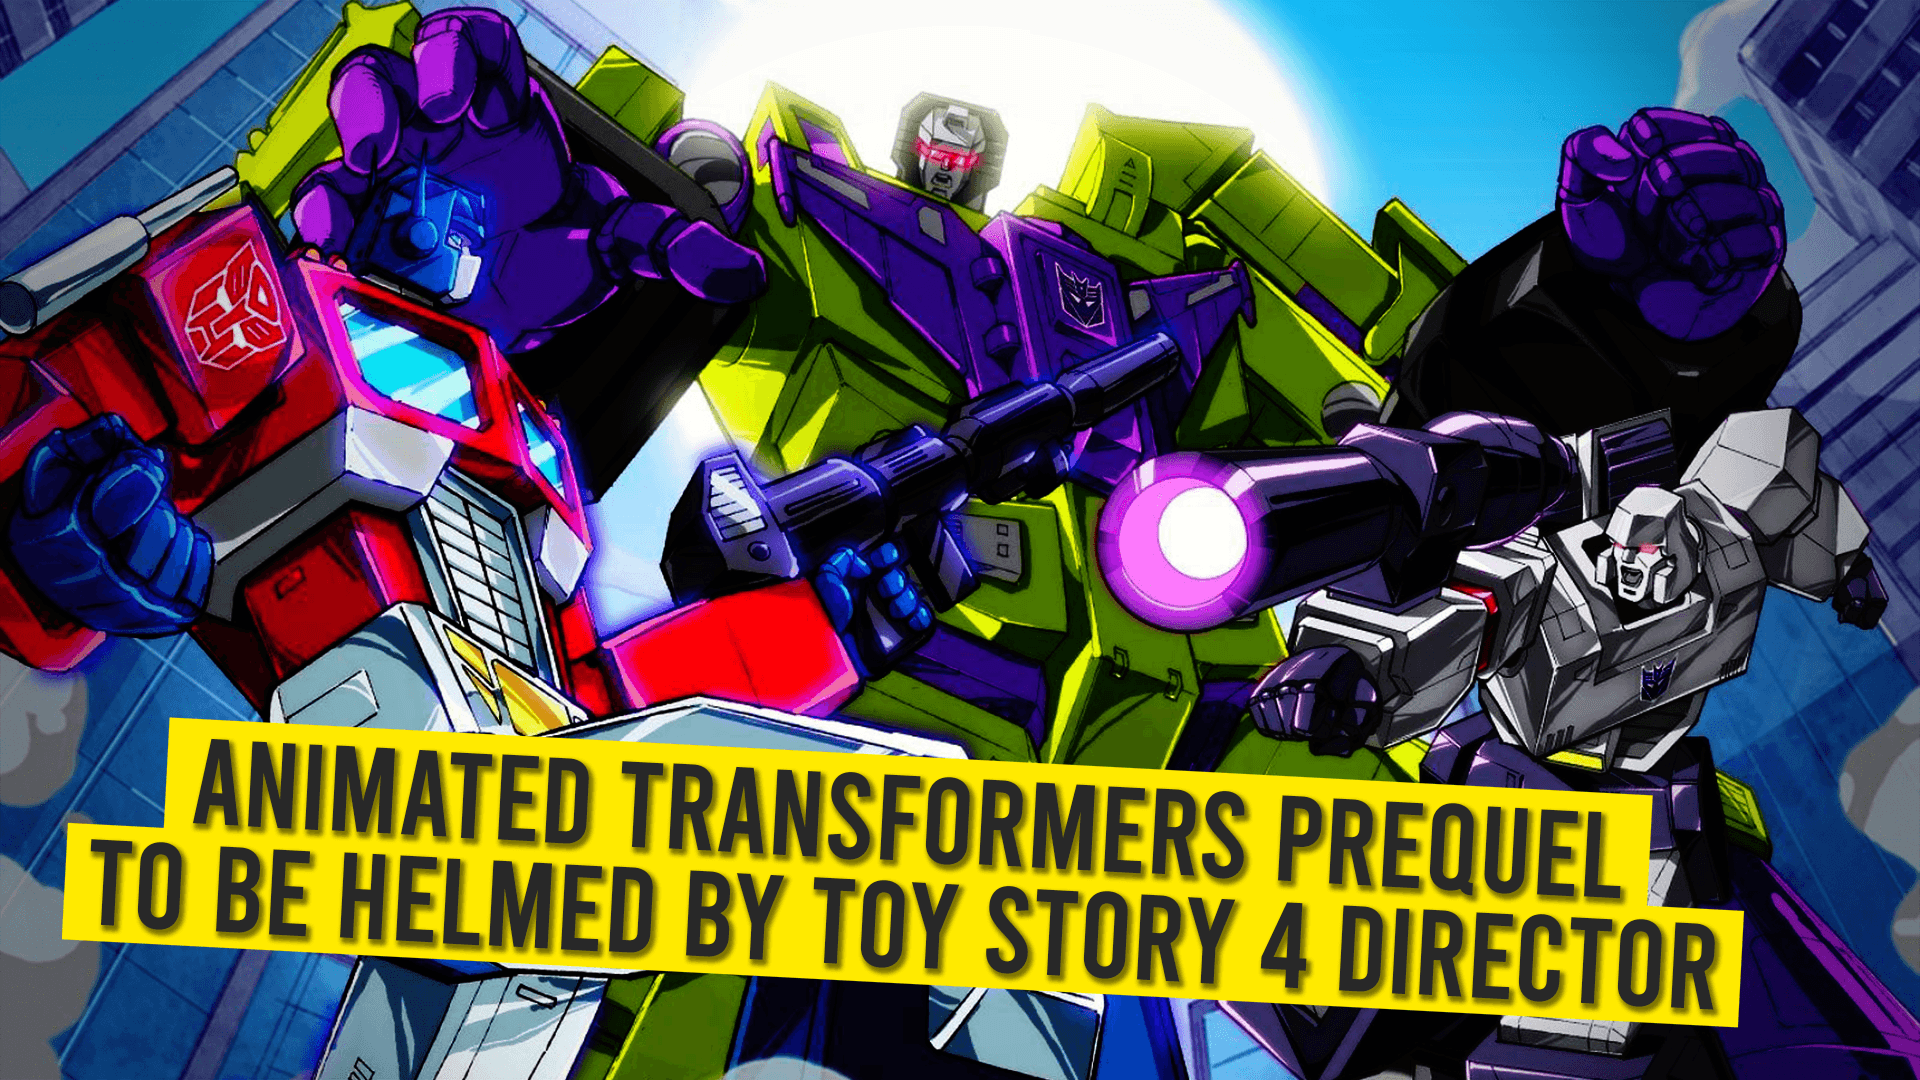 03 Animated Transformers Prequel To Be Helmed By Toy Story 4 Director